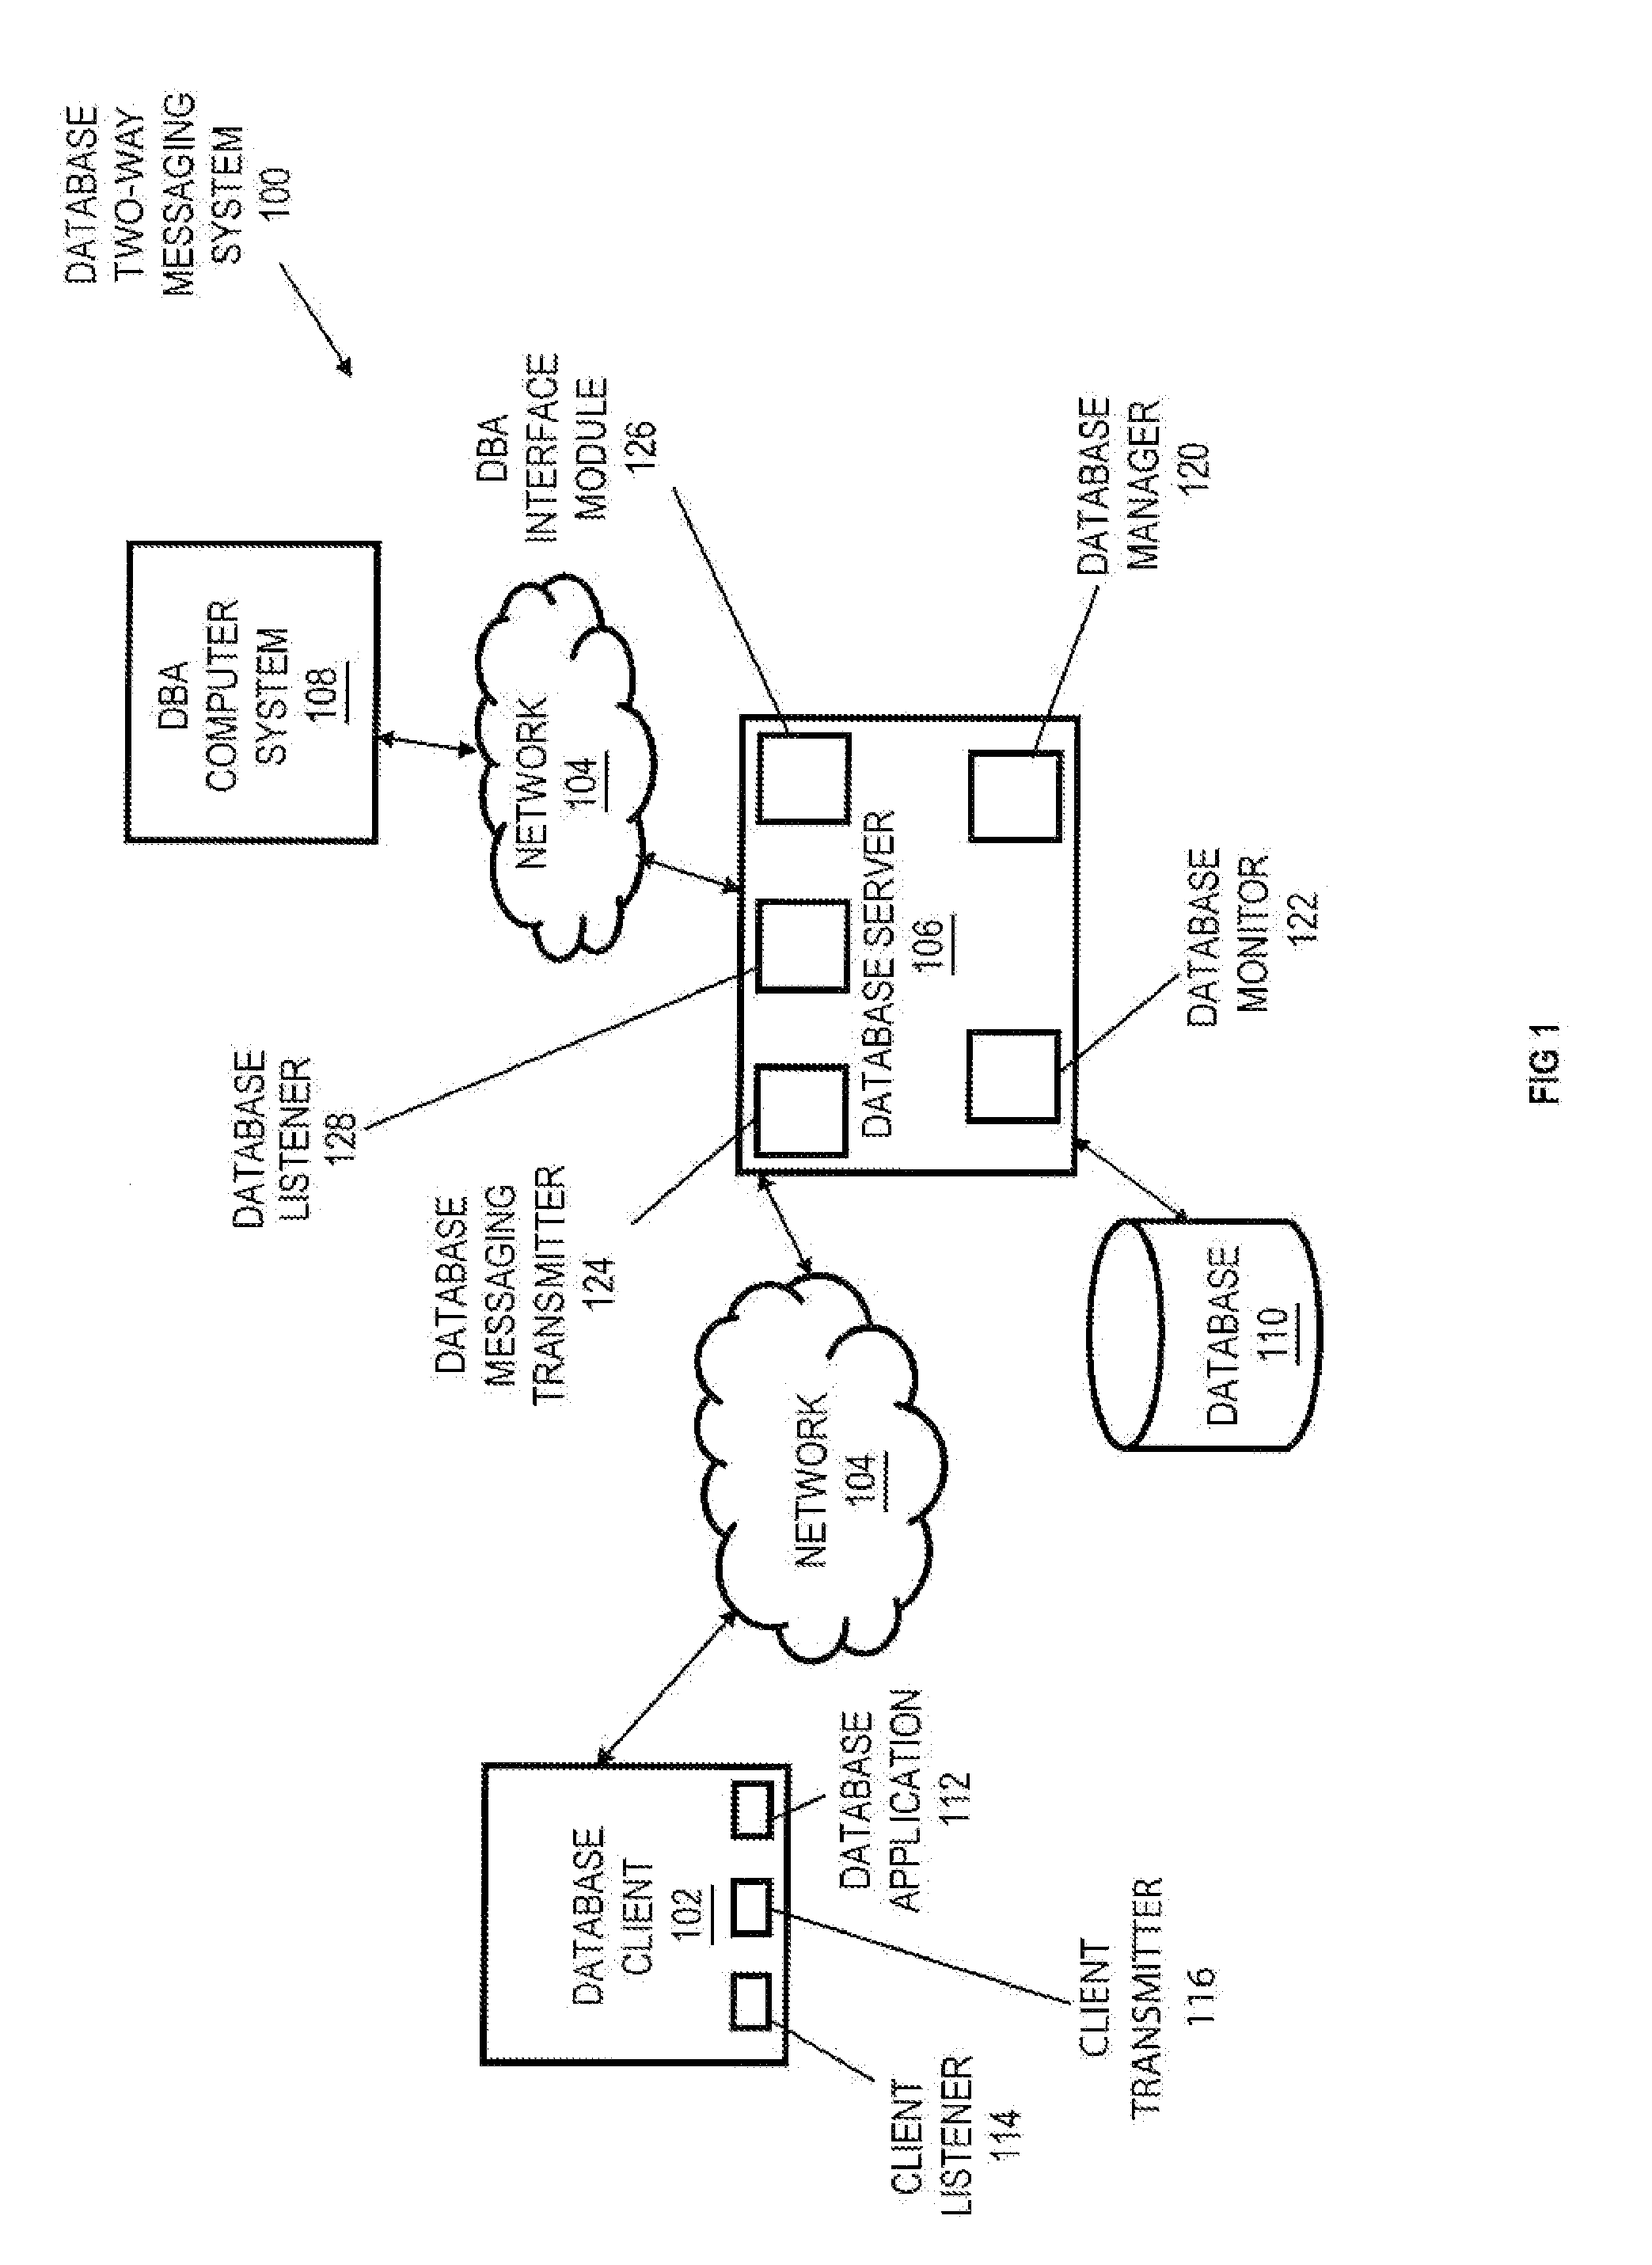 Integrated Two-Way Communications Between Database Client Users and Administrators